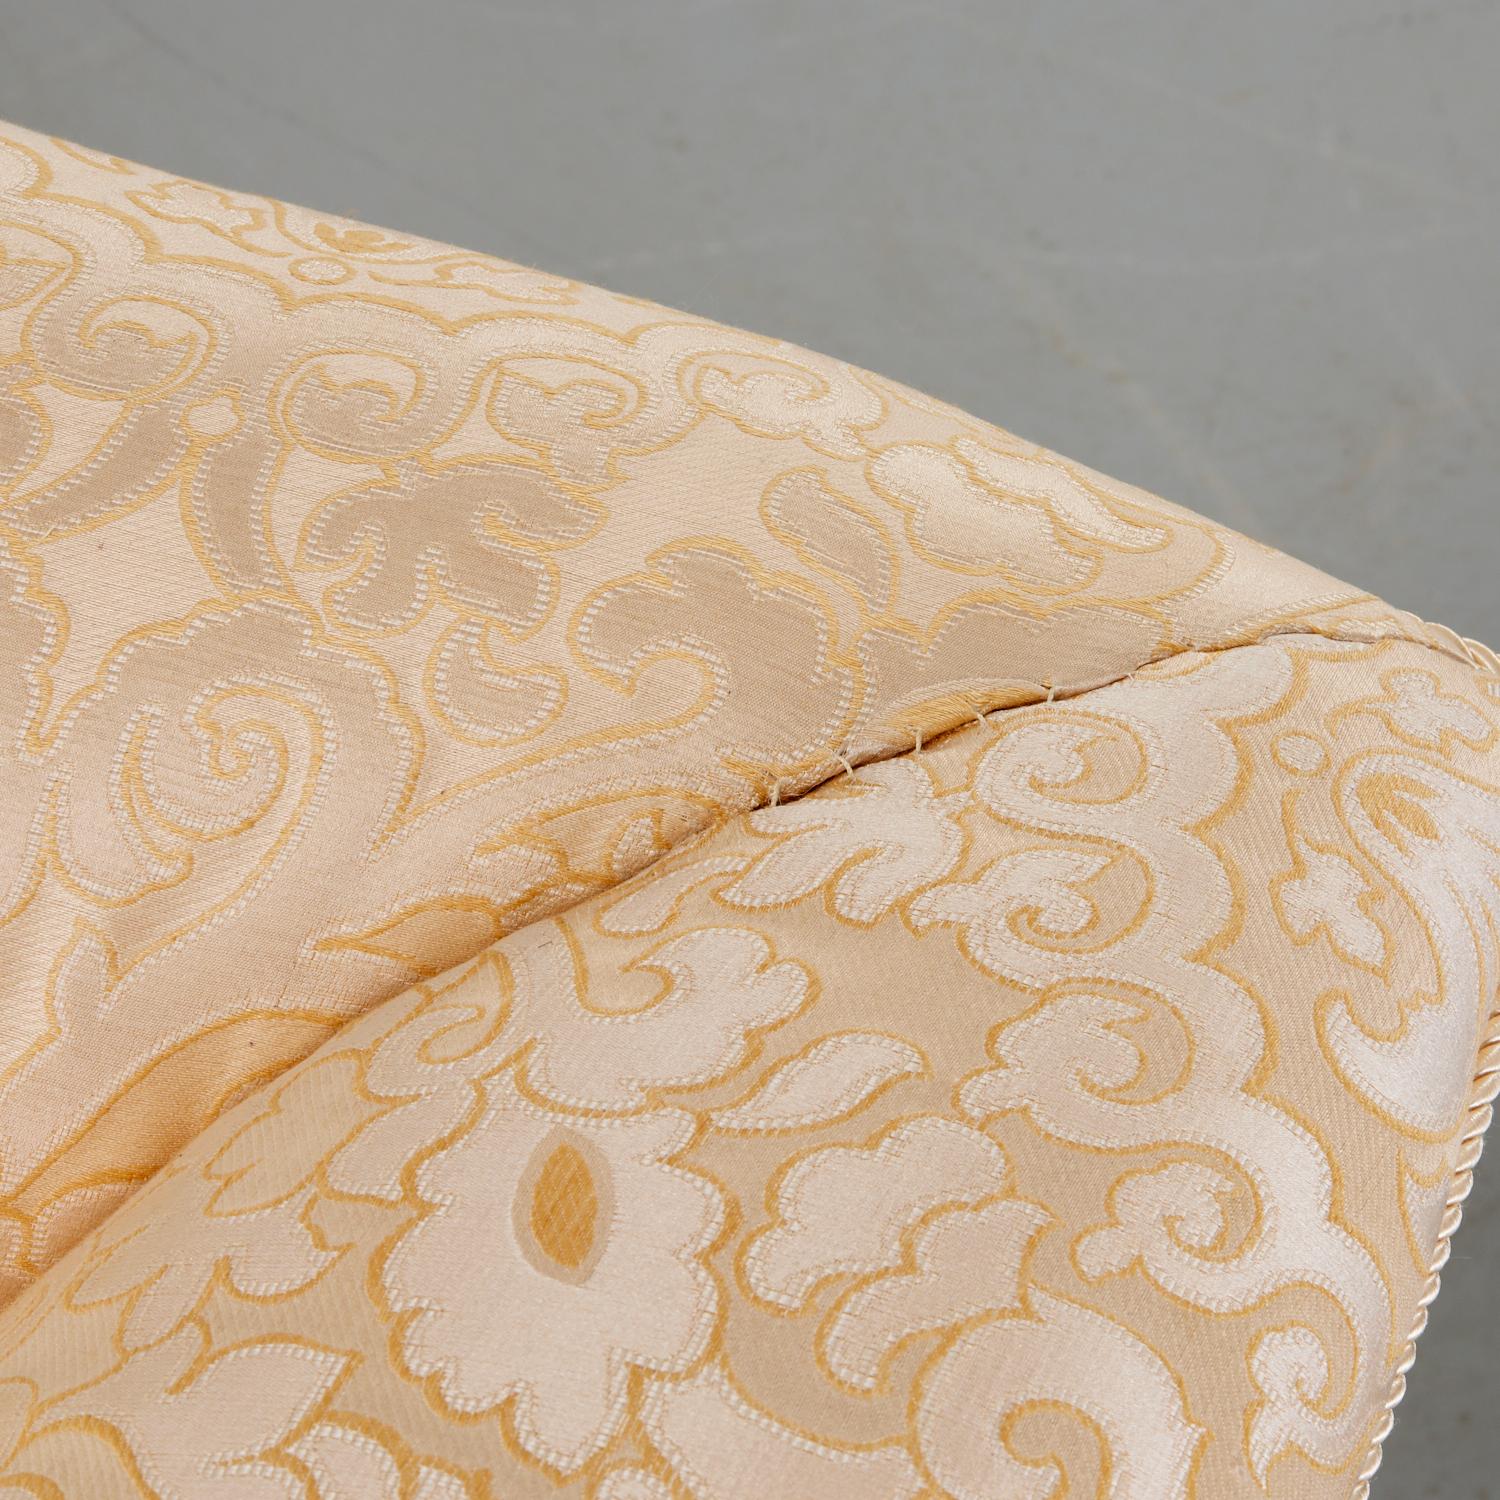 Matching Pair Late 20th c. Custom Upholstered Cream Silk Damask 3-Seat Sofas For Sale 7